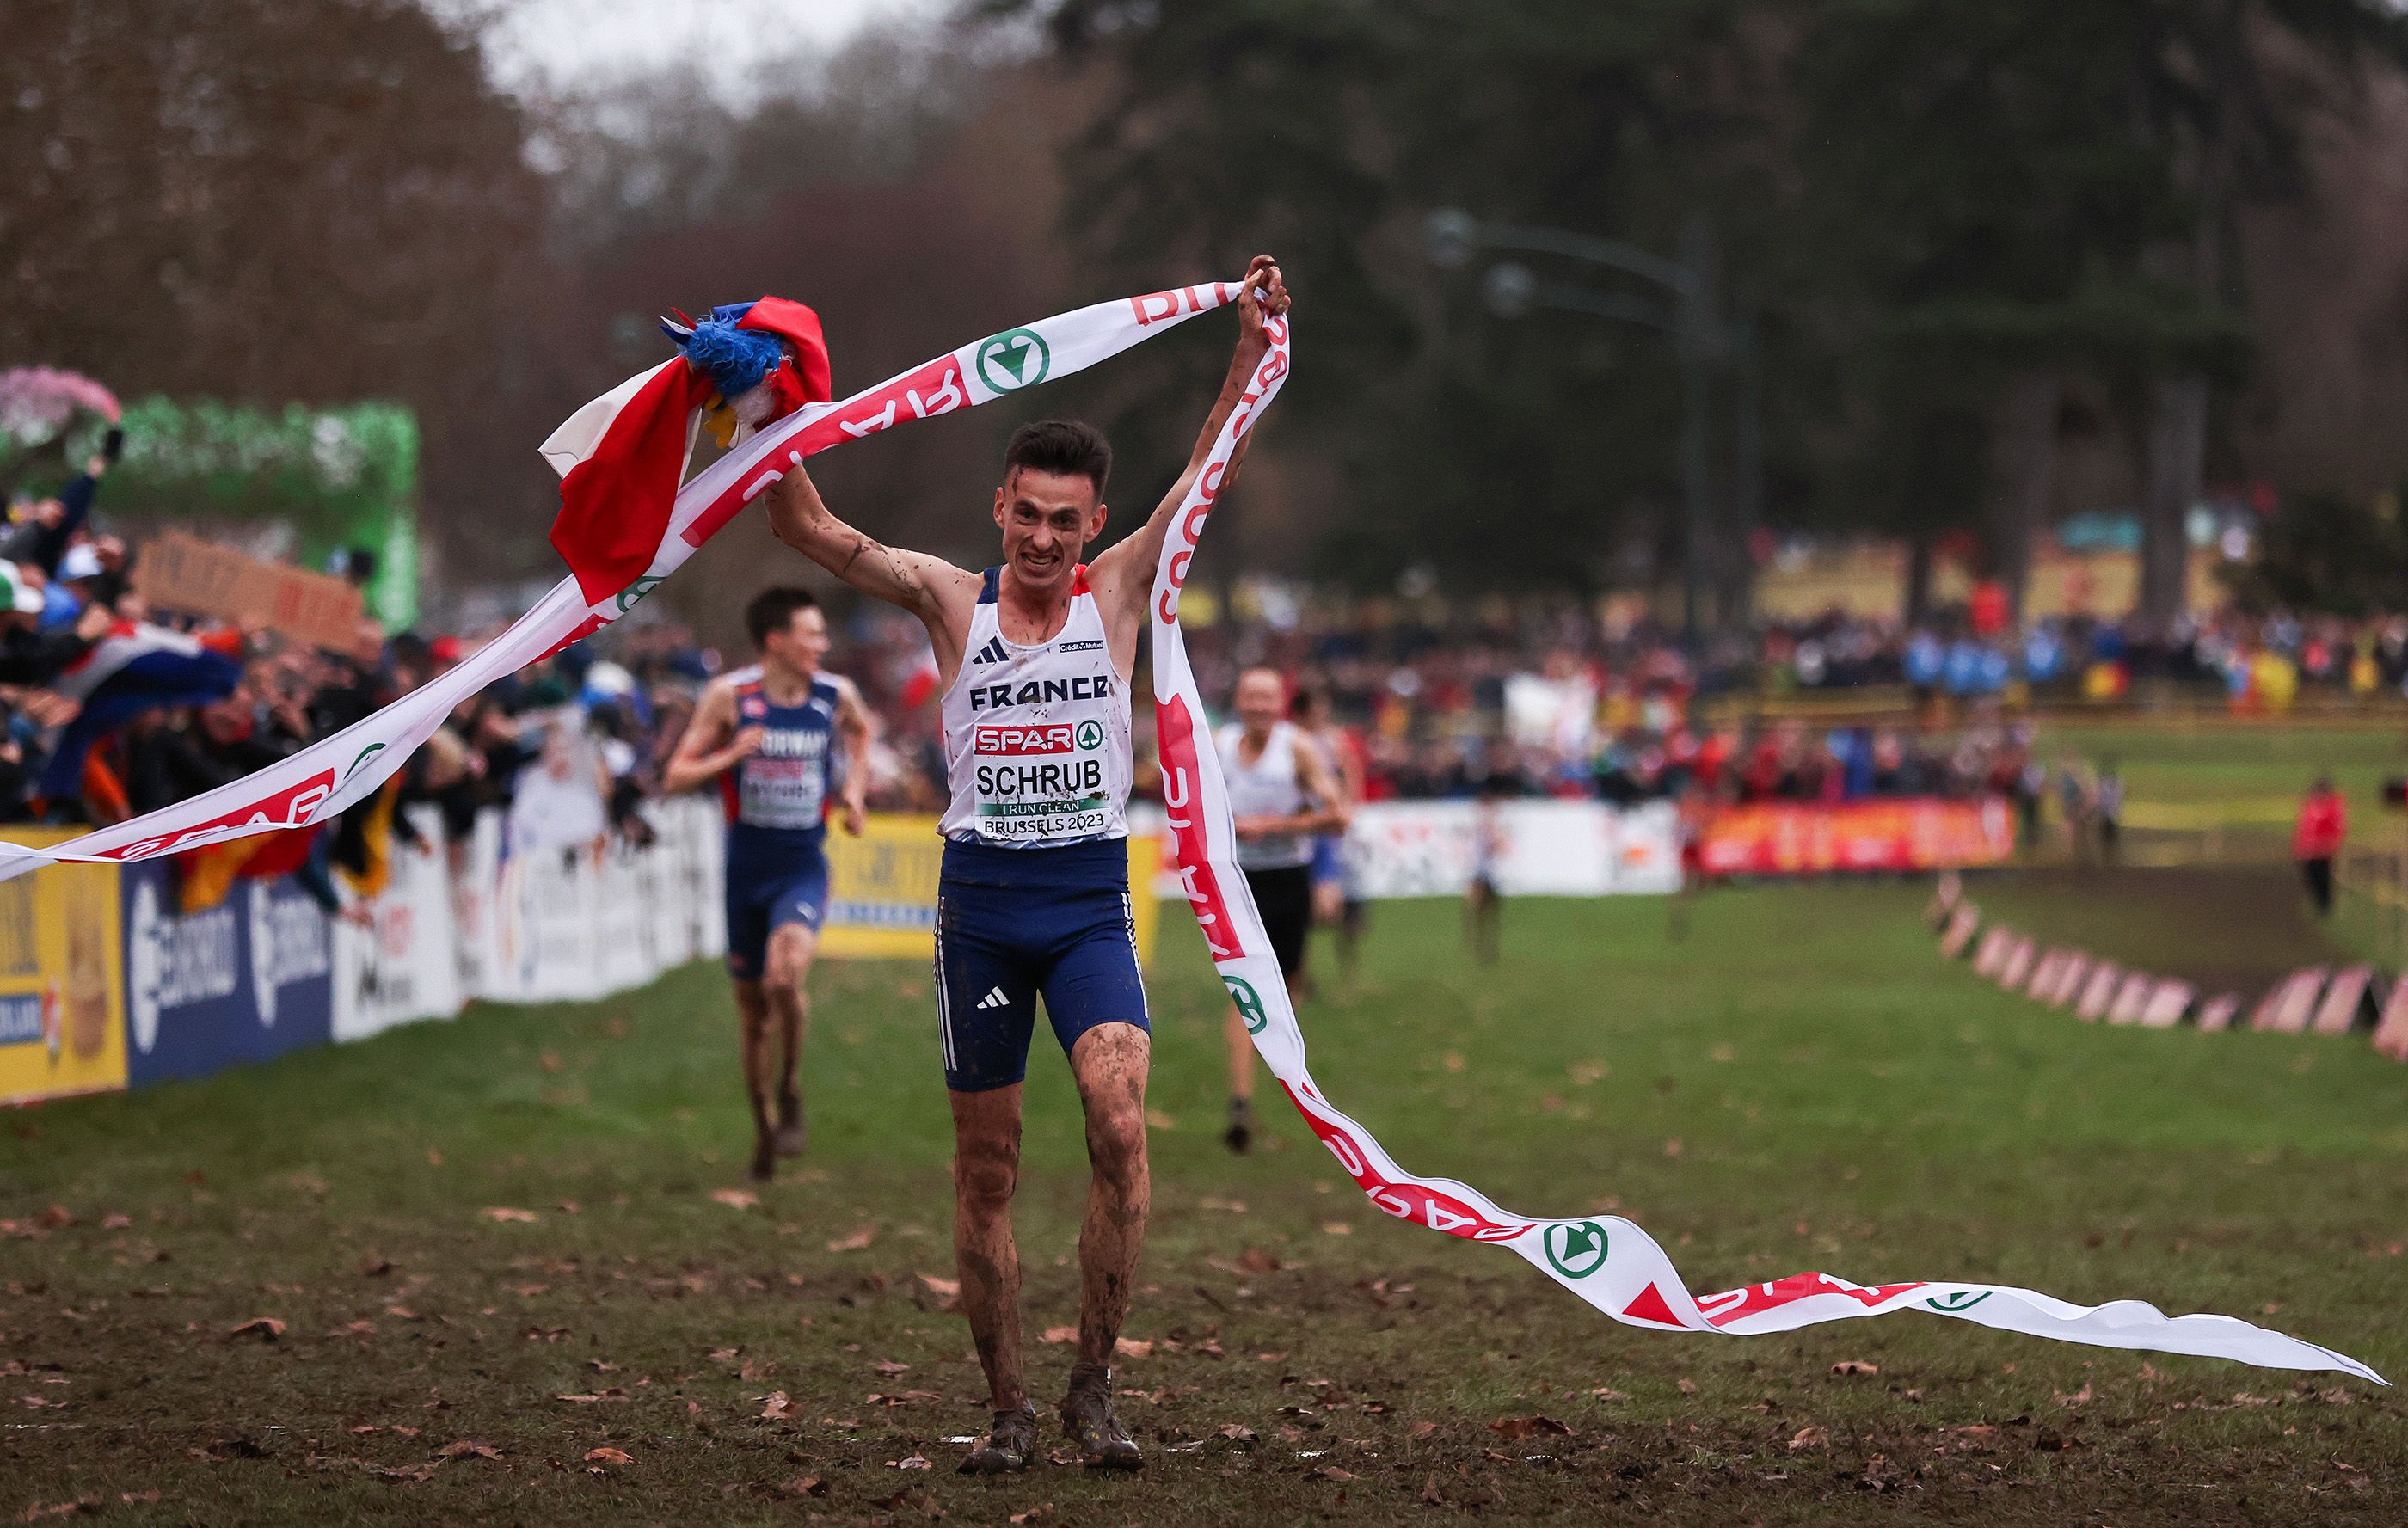 Yann Schrub celebrates his win at the European Cross Country Championships